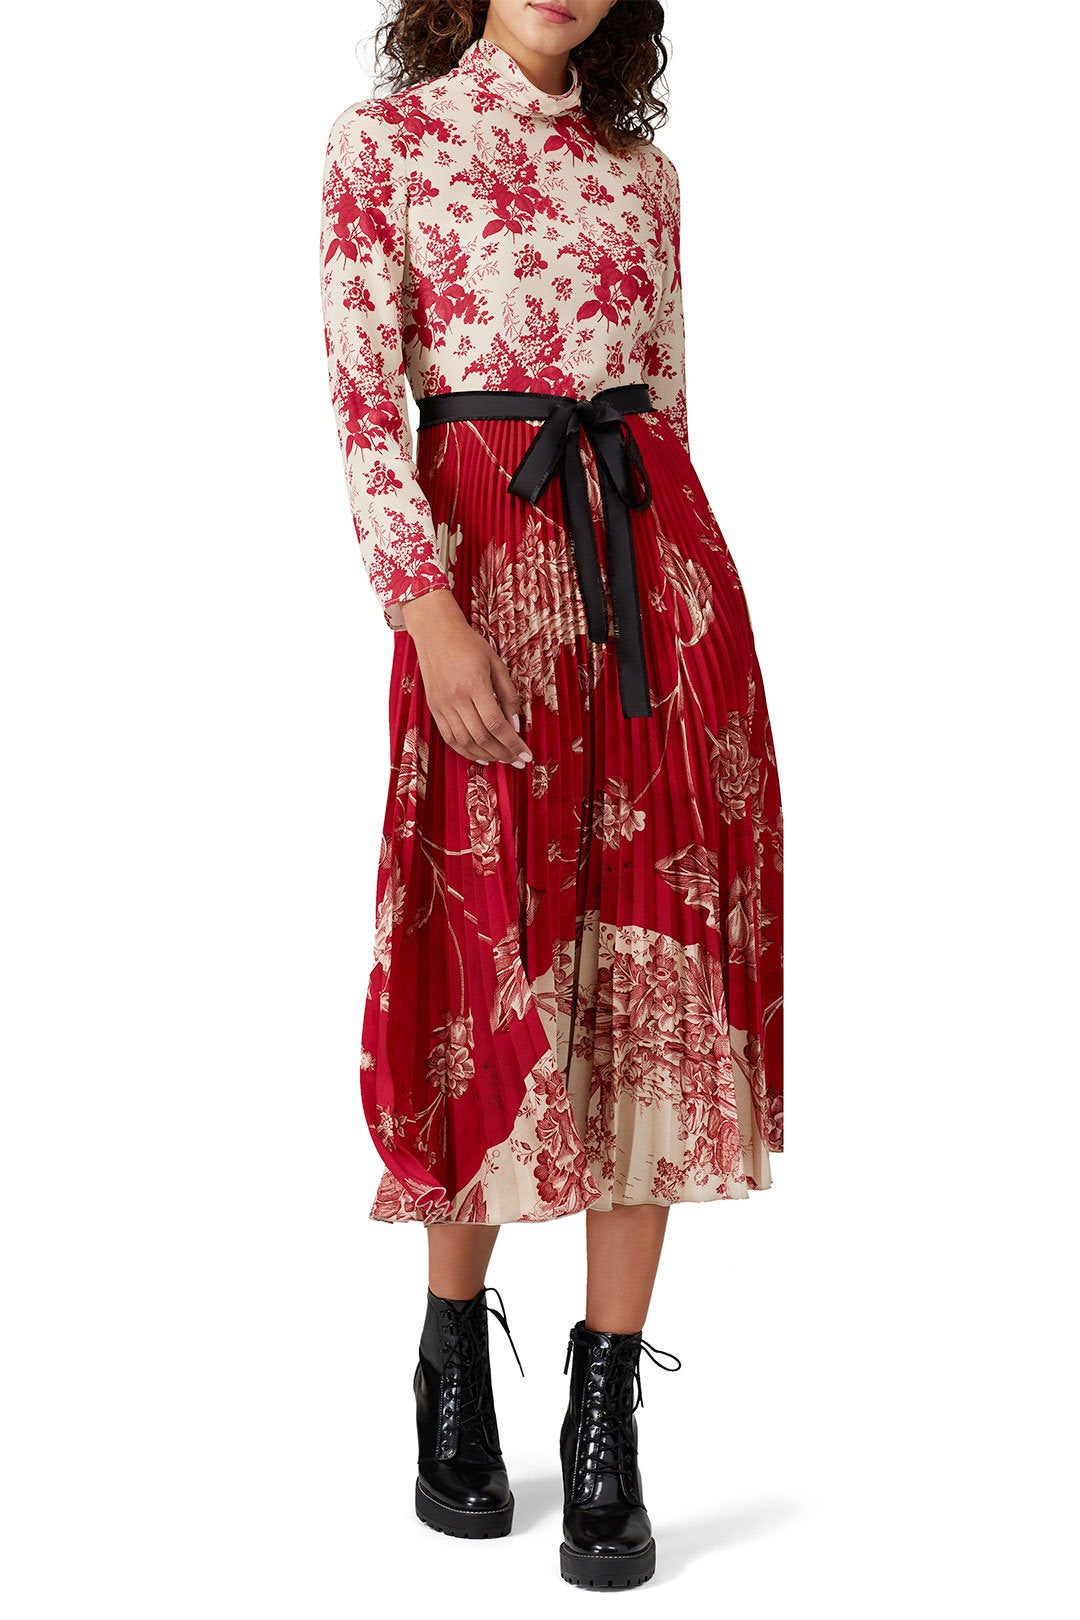 RED Valentino + Pleated Mixed Floral Dress